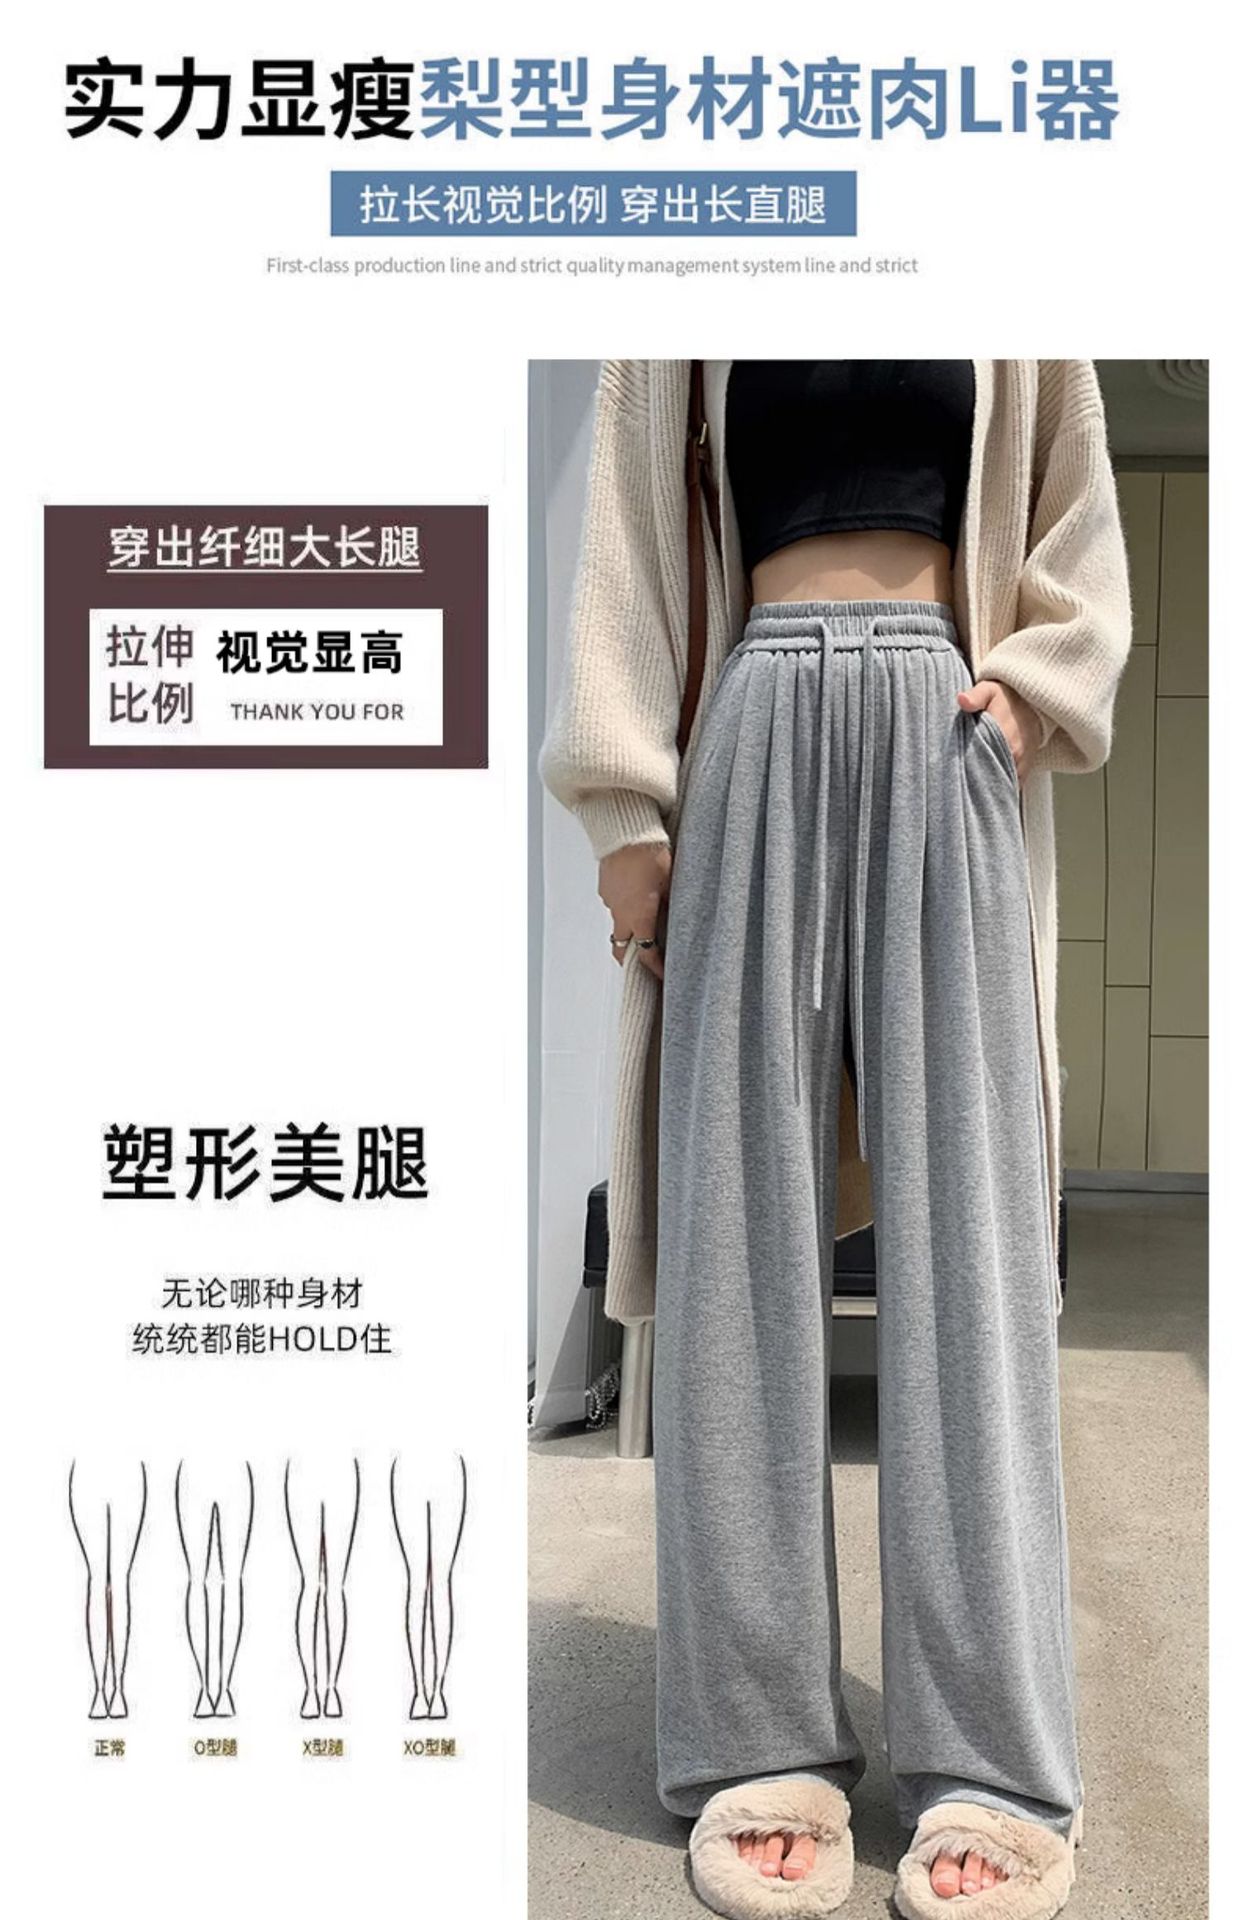 Glutinous Rice Slip Casual Pants Live Hot Spring and Summer Women's New High Waist Drooping Straight-Leg Pants Factory Direct Sales Women Clothes